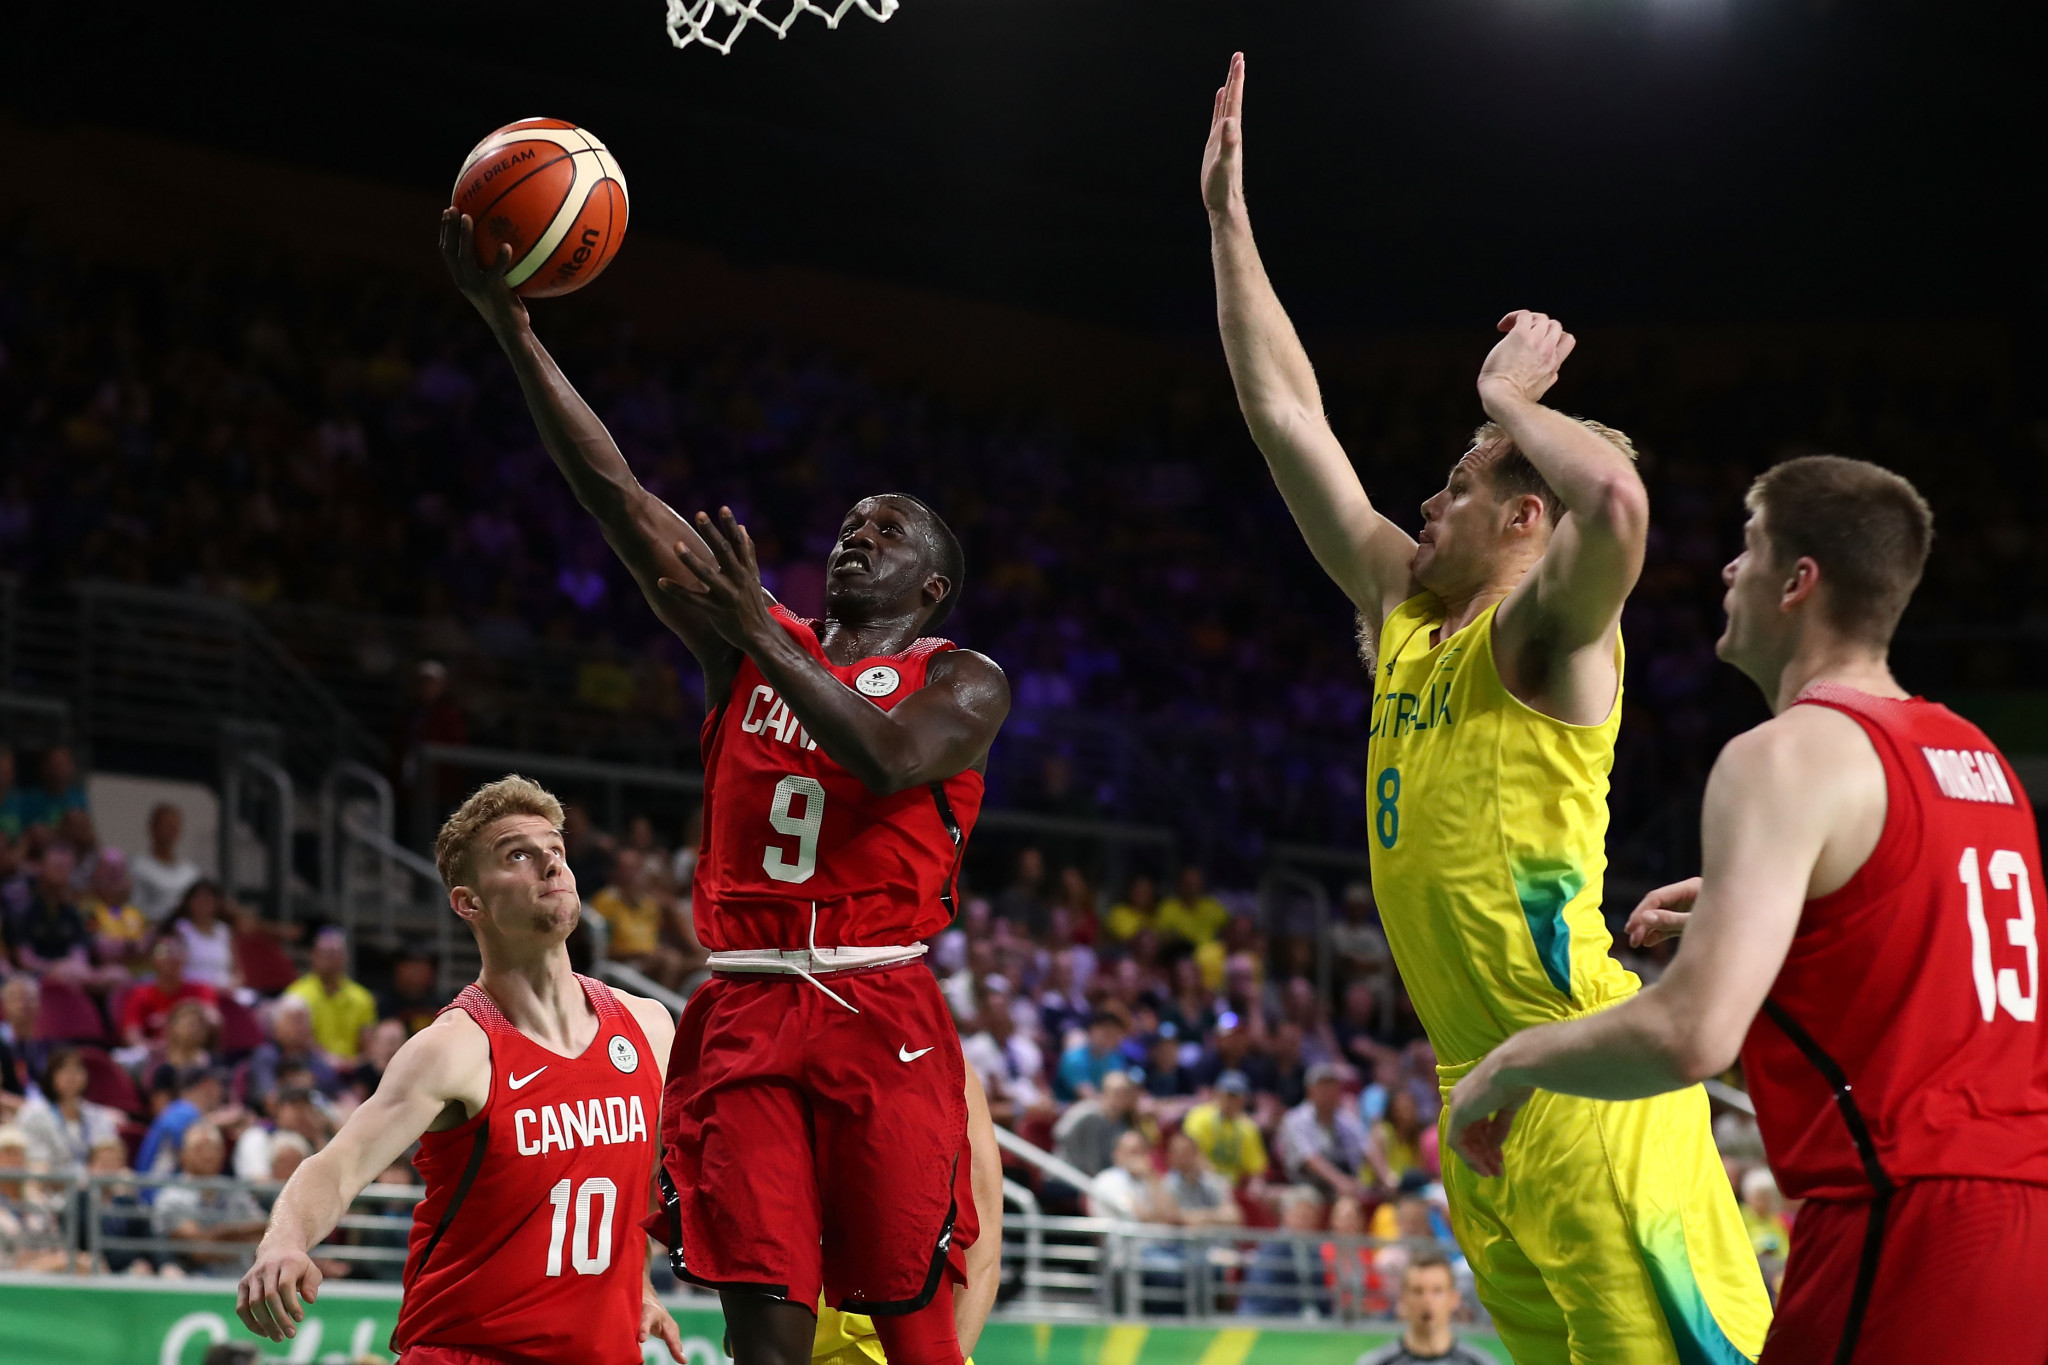 Organisers of the Olympic basketball qualifier in Victoria, due to take place between June 29 and July 4, are hoping to operate at 10 per cent capacity ©Getty Images